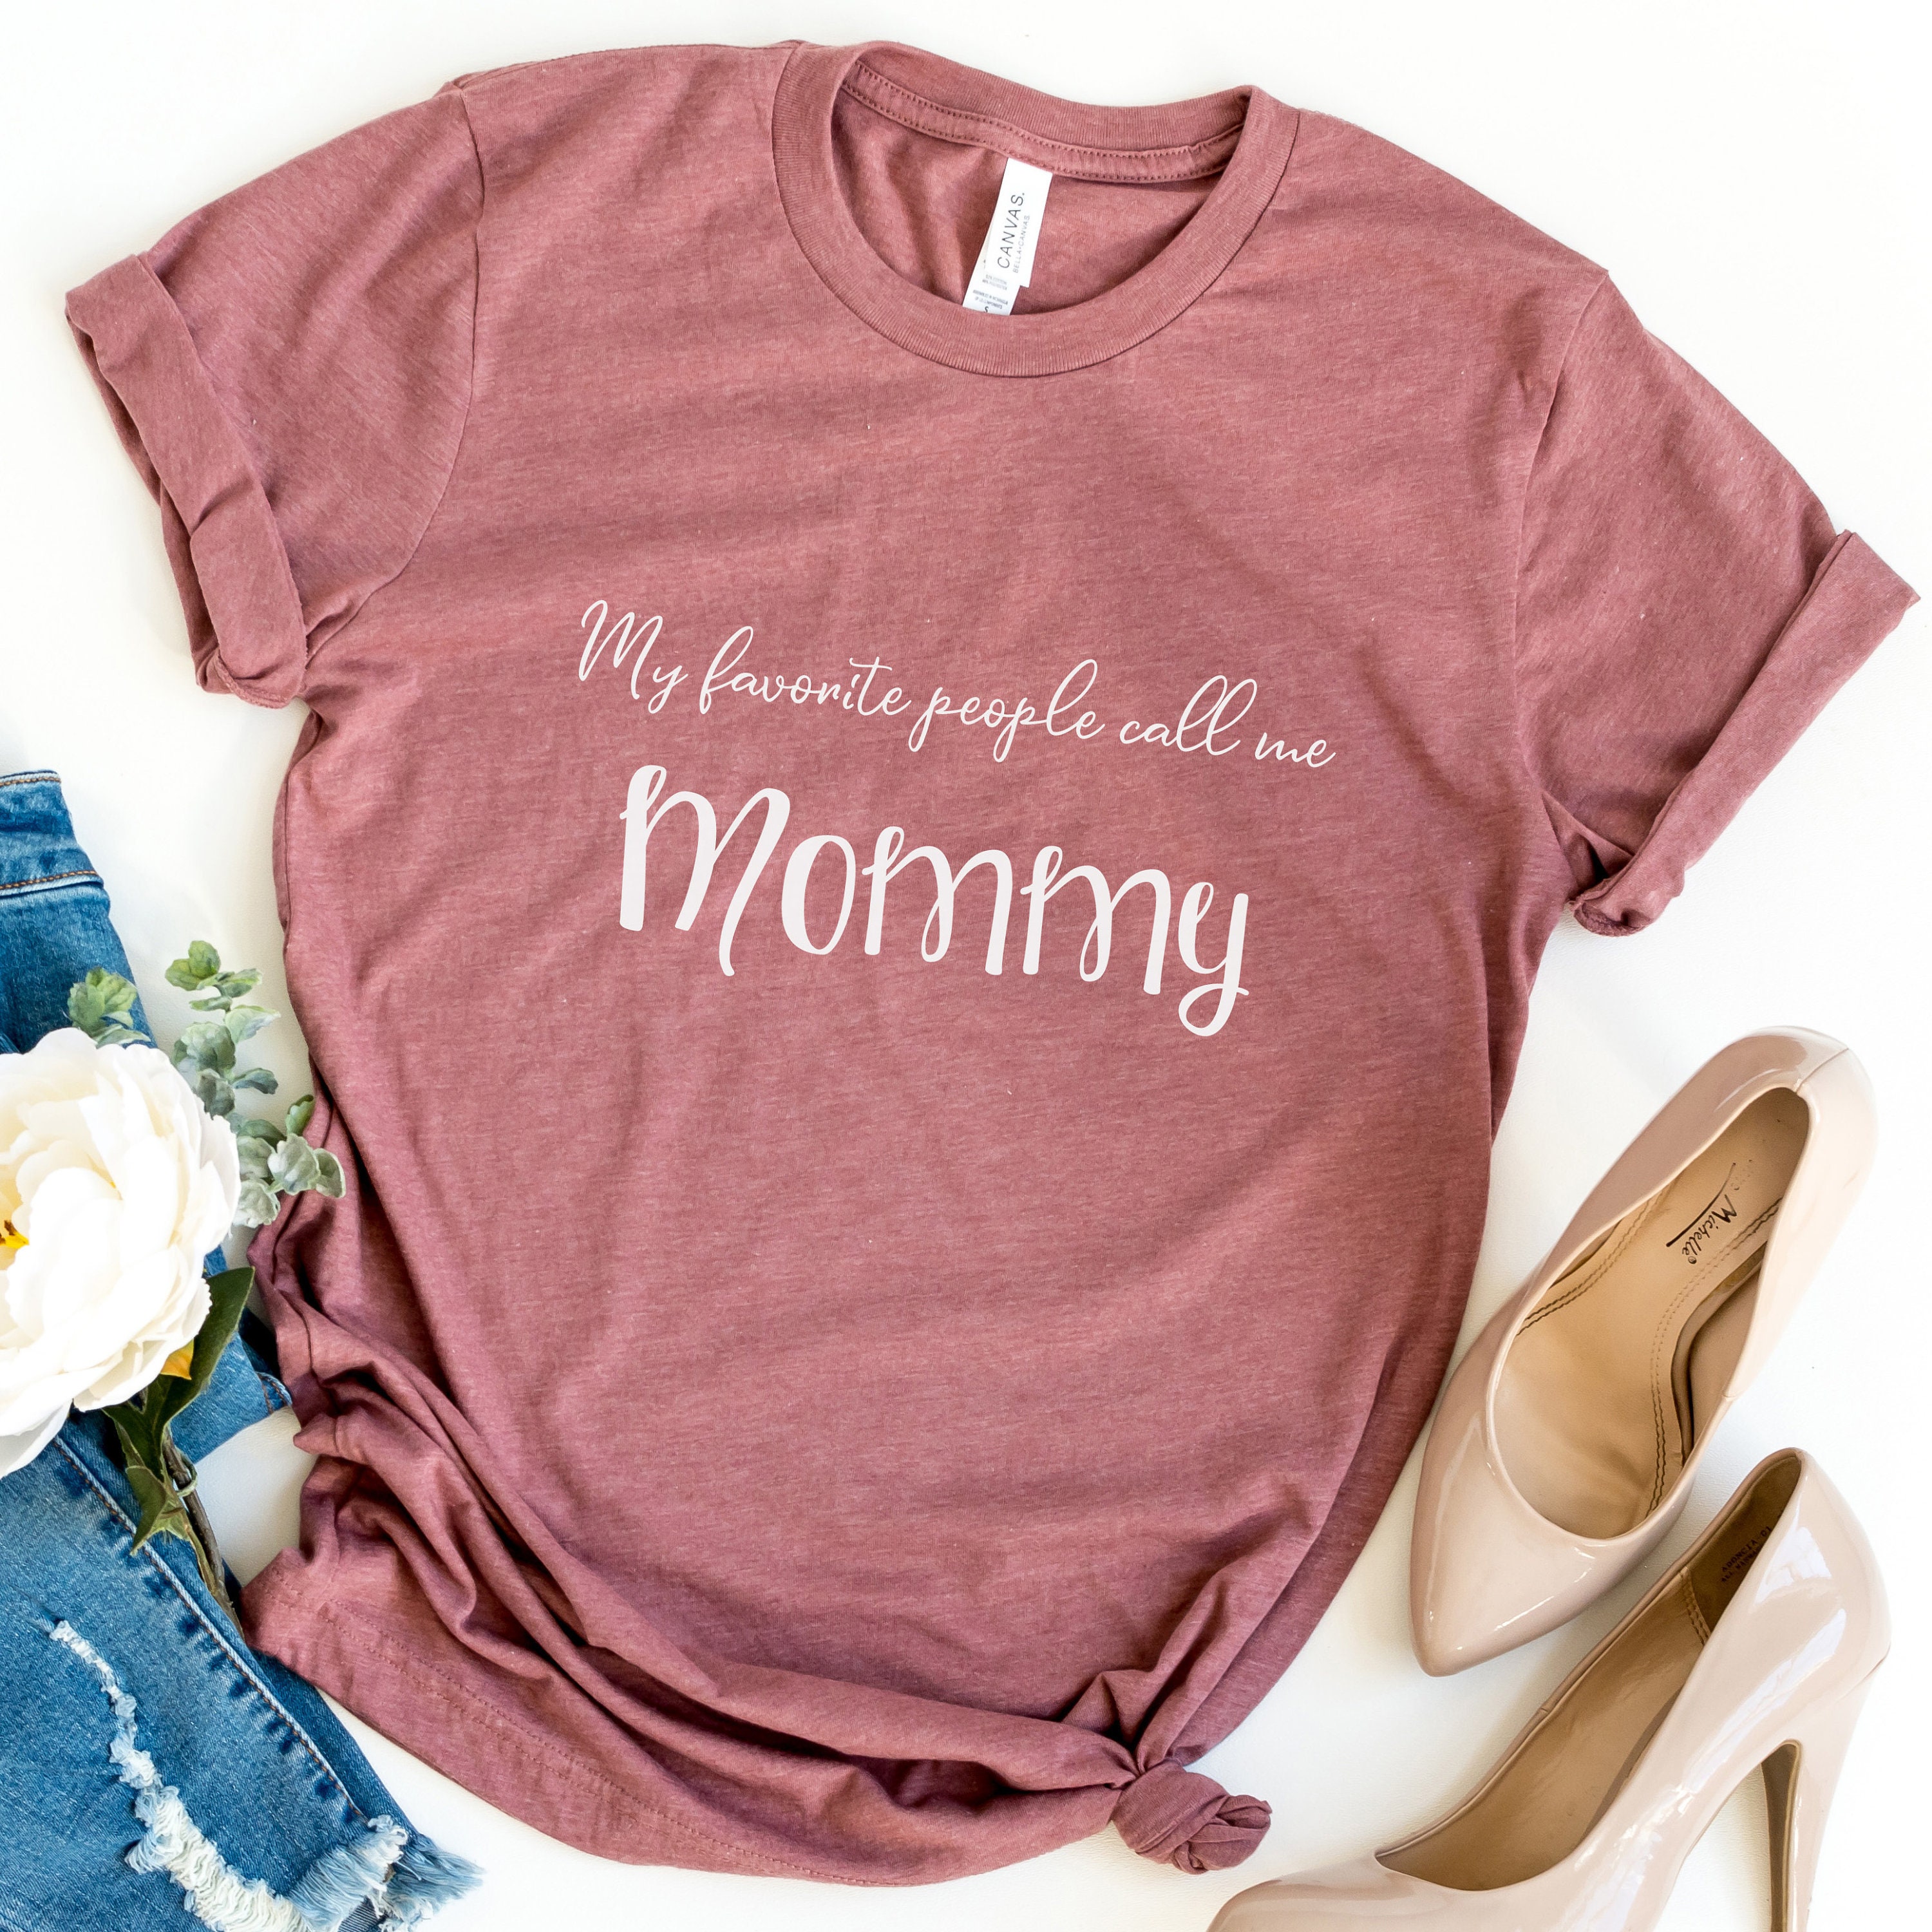 MY FAVORITE PEOPLE Call Me Mommy Shirt  mothers day gift  Mothers Day Tee  mom shirt  Mom Tshirt  mom tee  Shirt for Mother  mom gift